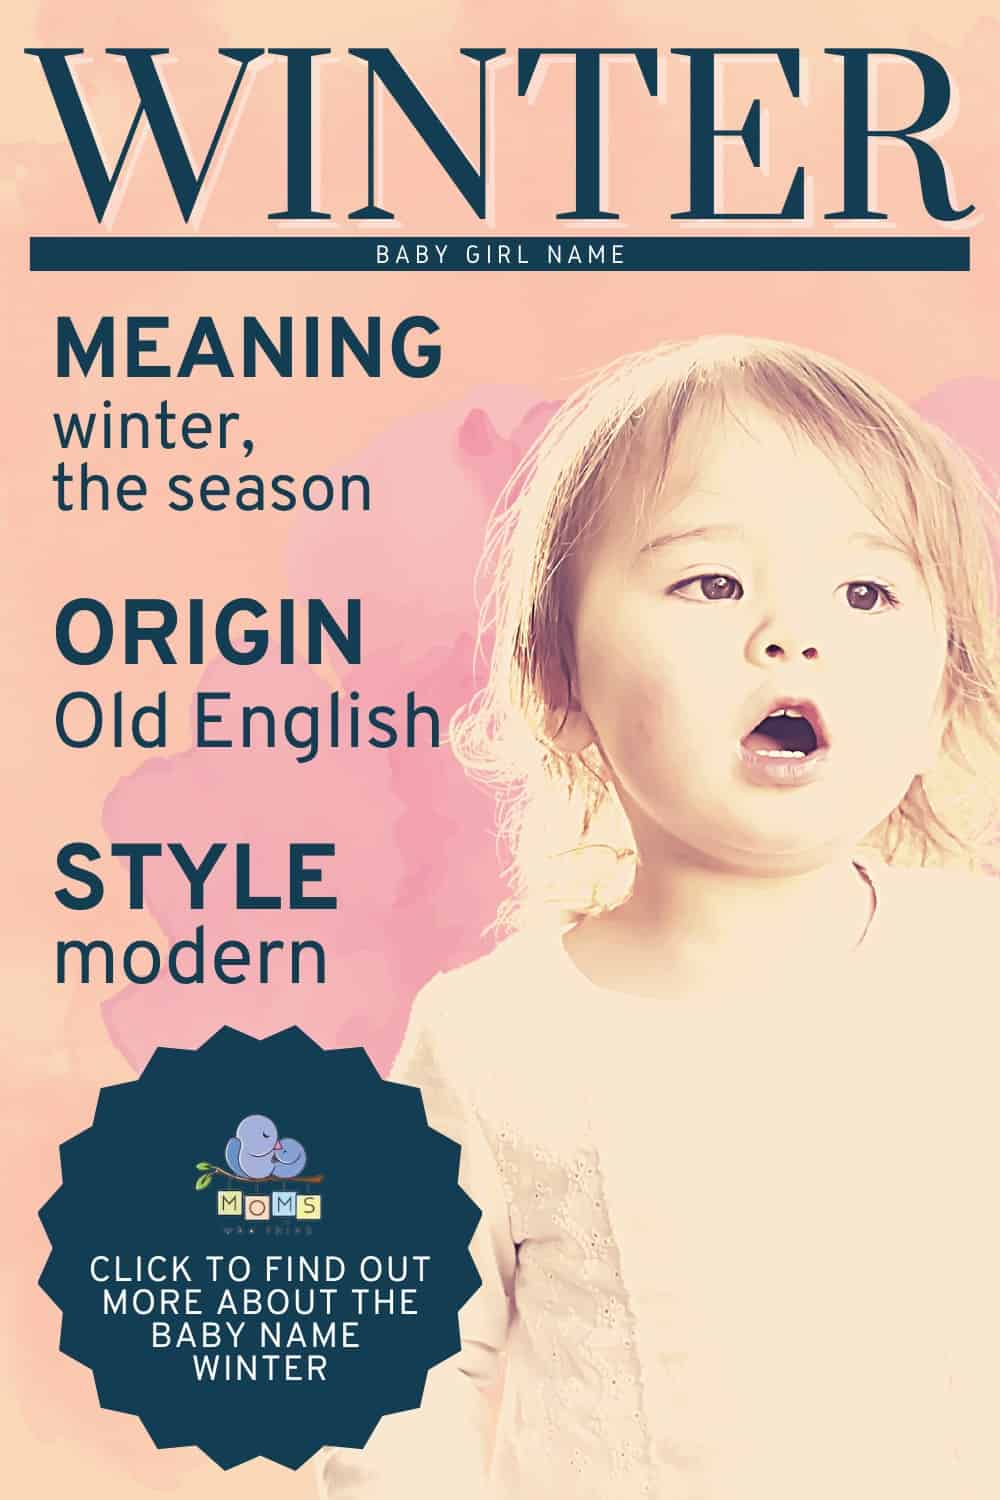 Baby name Winter